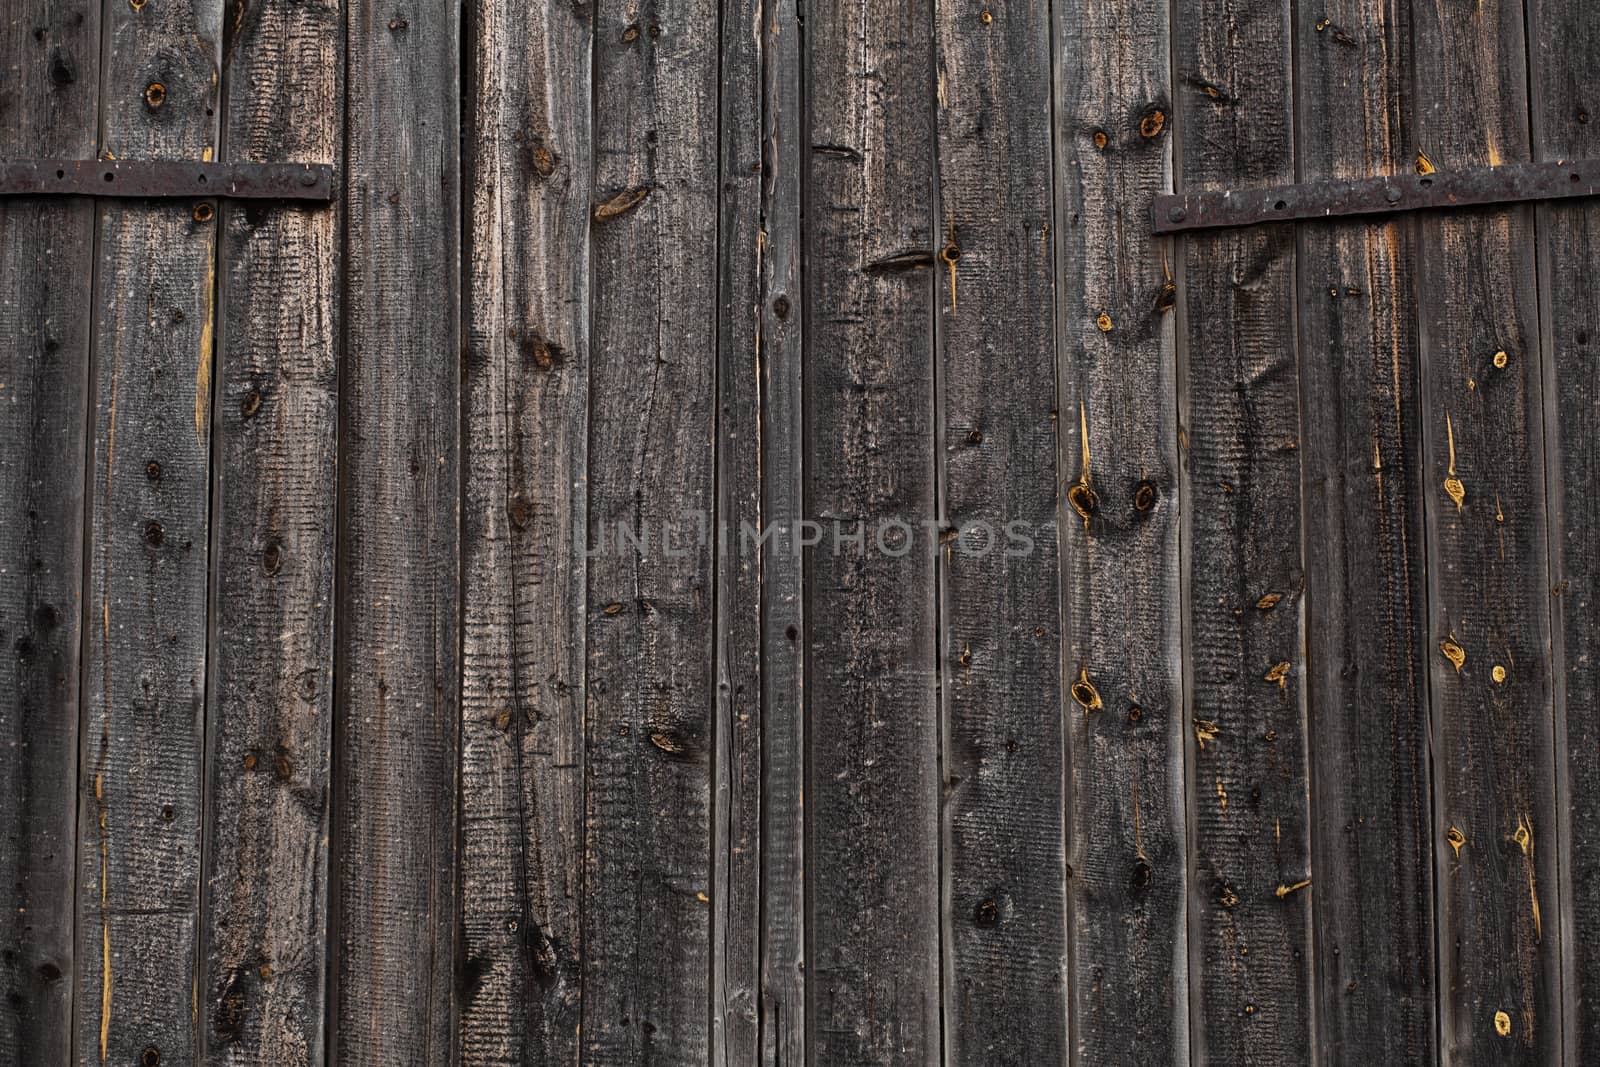 Close-up Large wooden gate and dried wood. Wood plank texture.